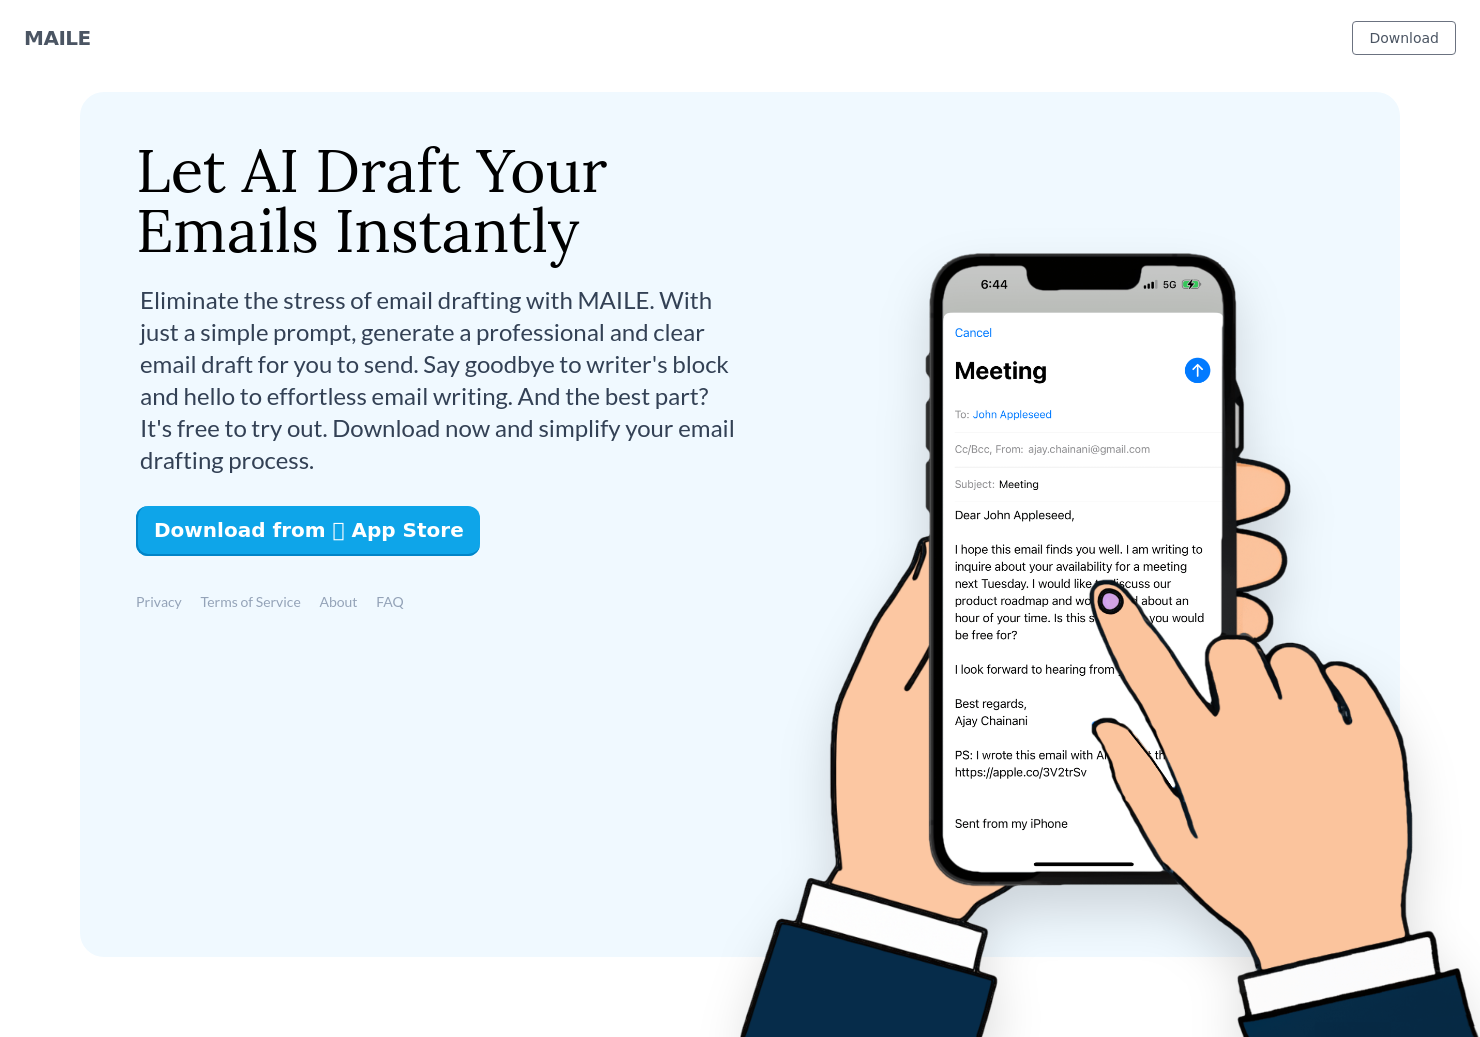 startuptile MAILE for iPhone-Let AI draft your emails instantly